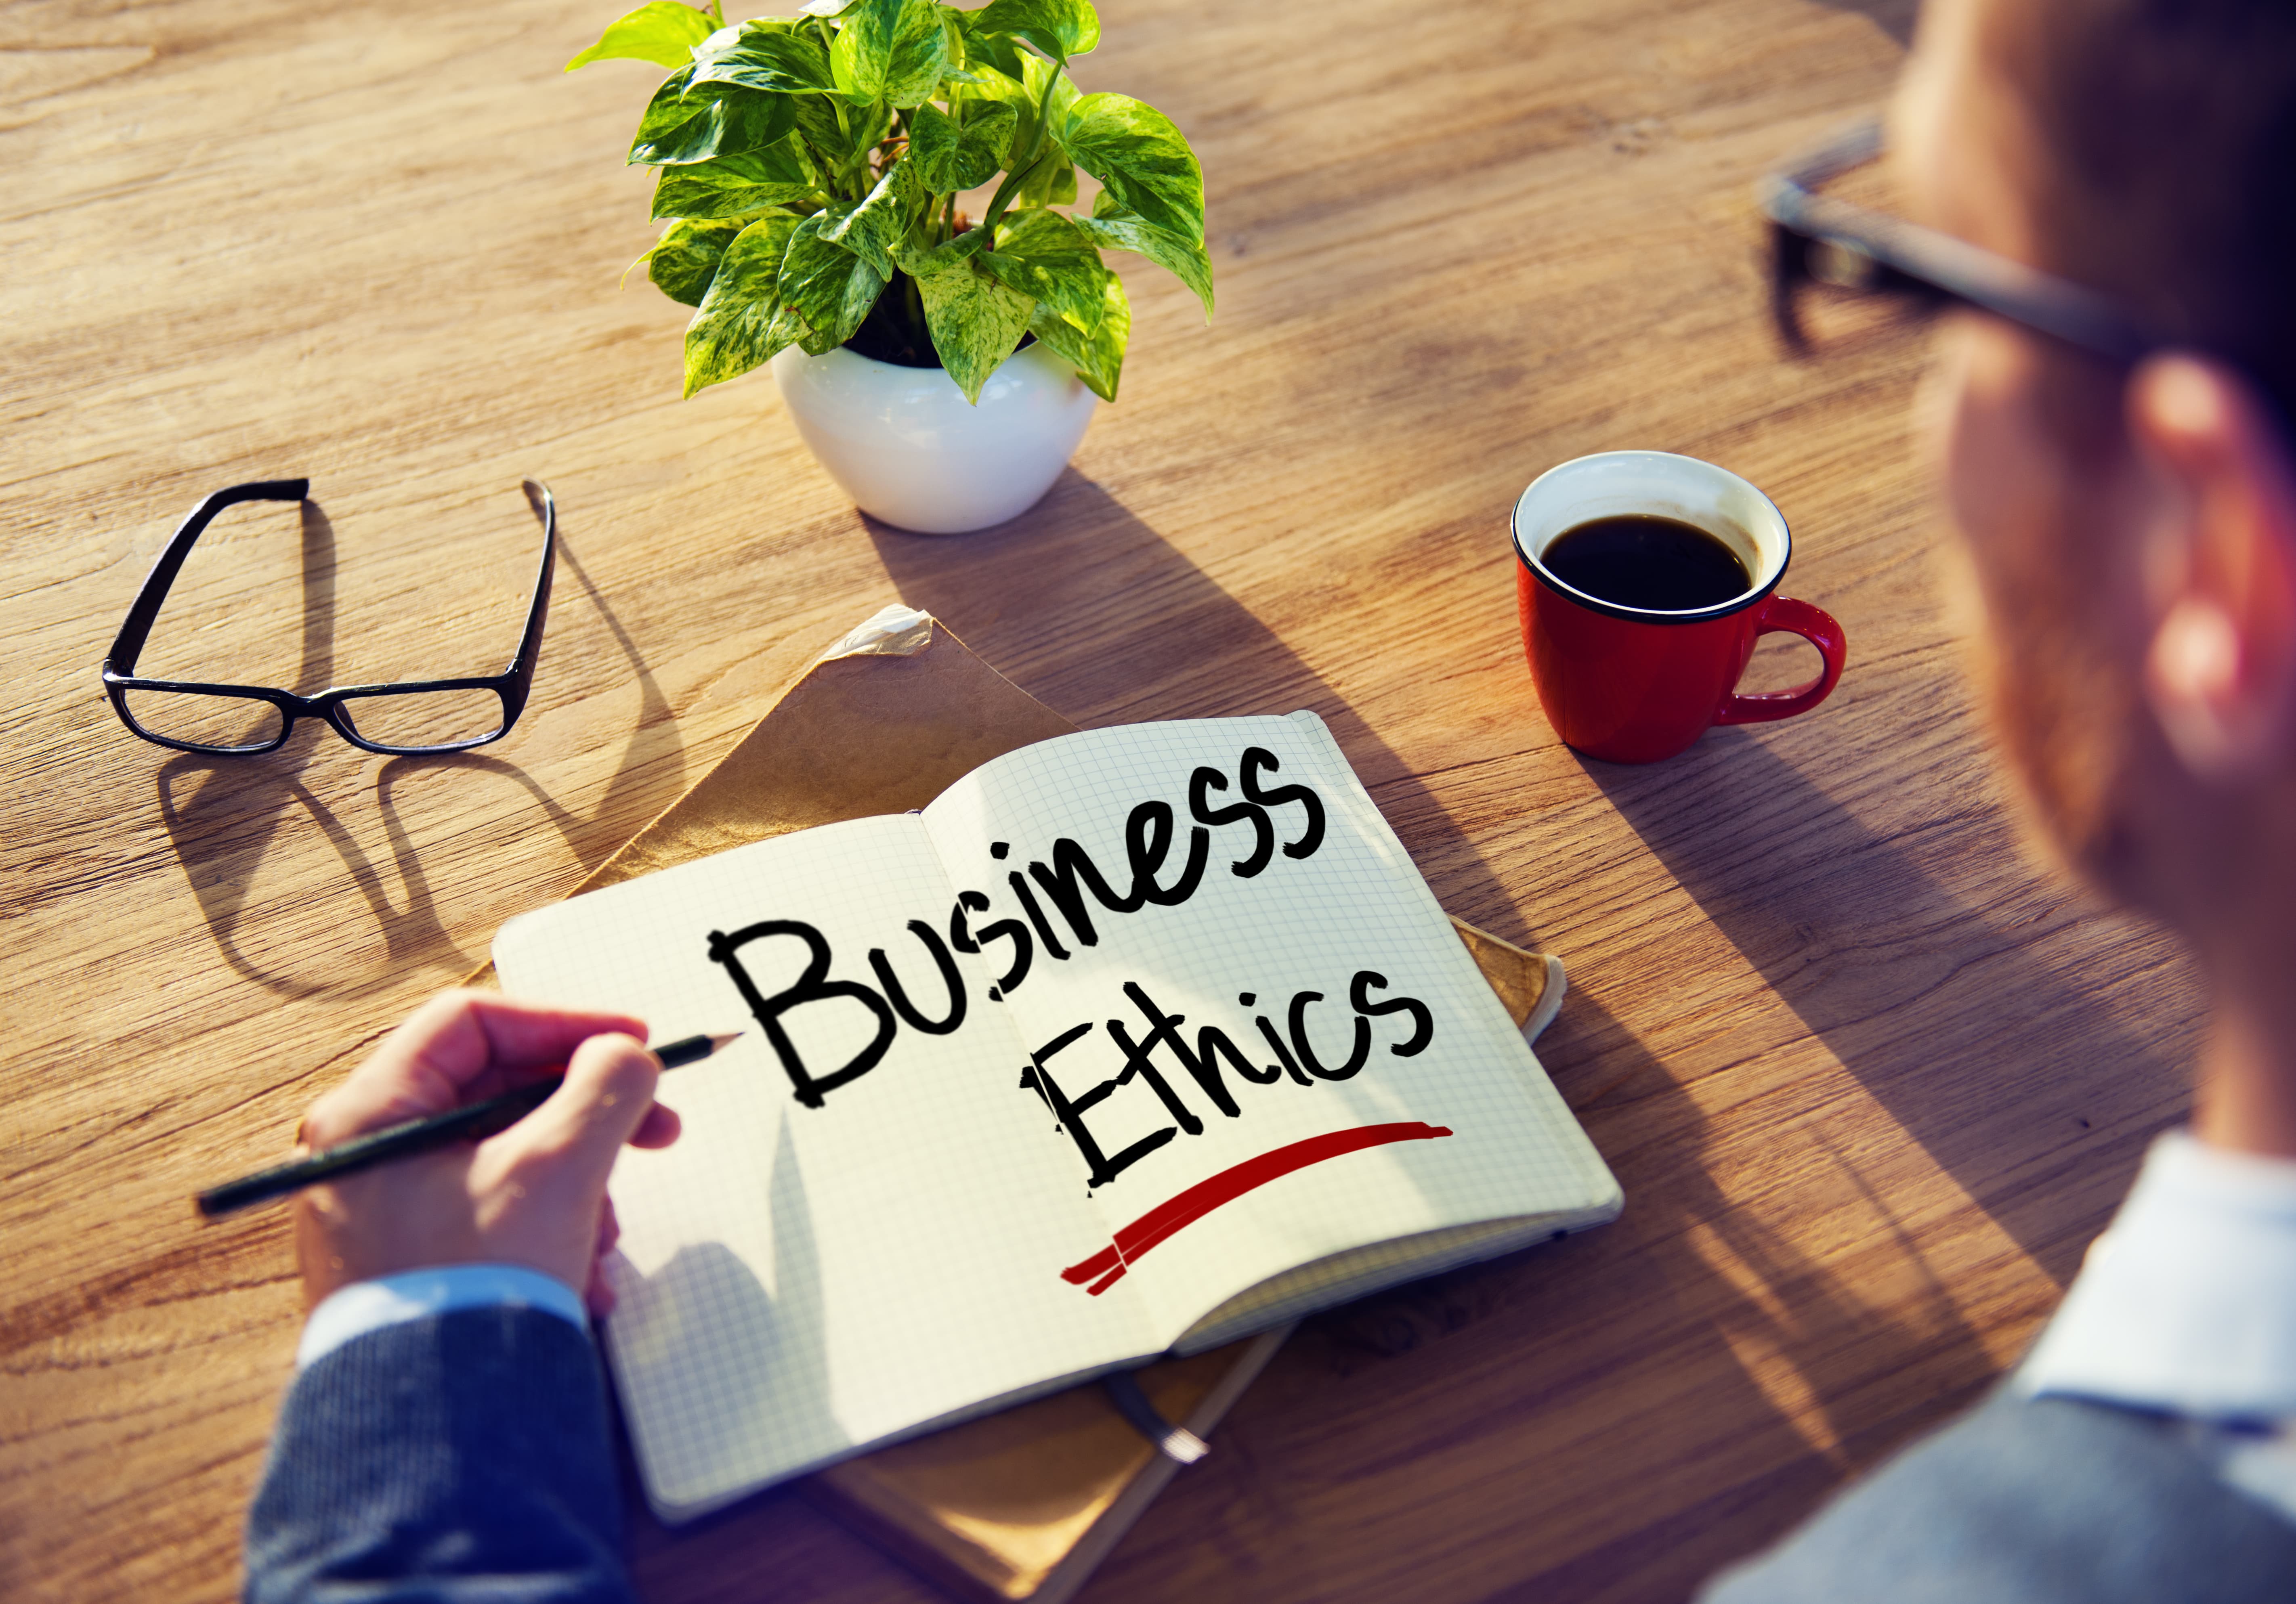 The Important Distinction Between Ethics and Compliance